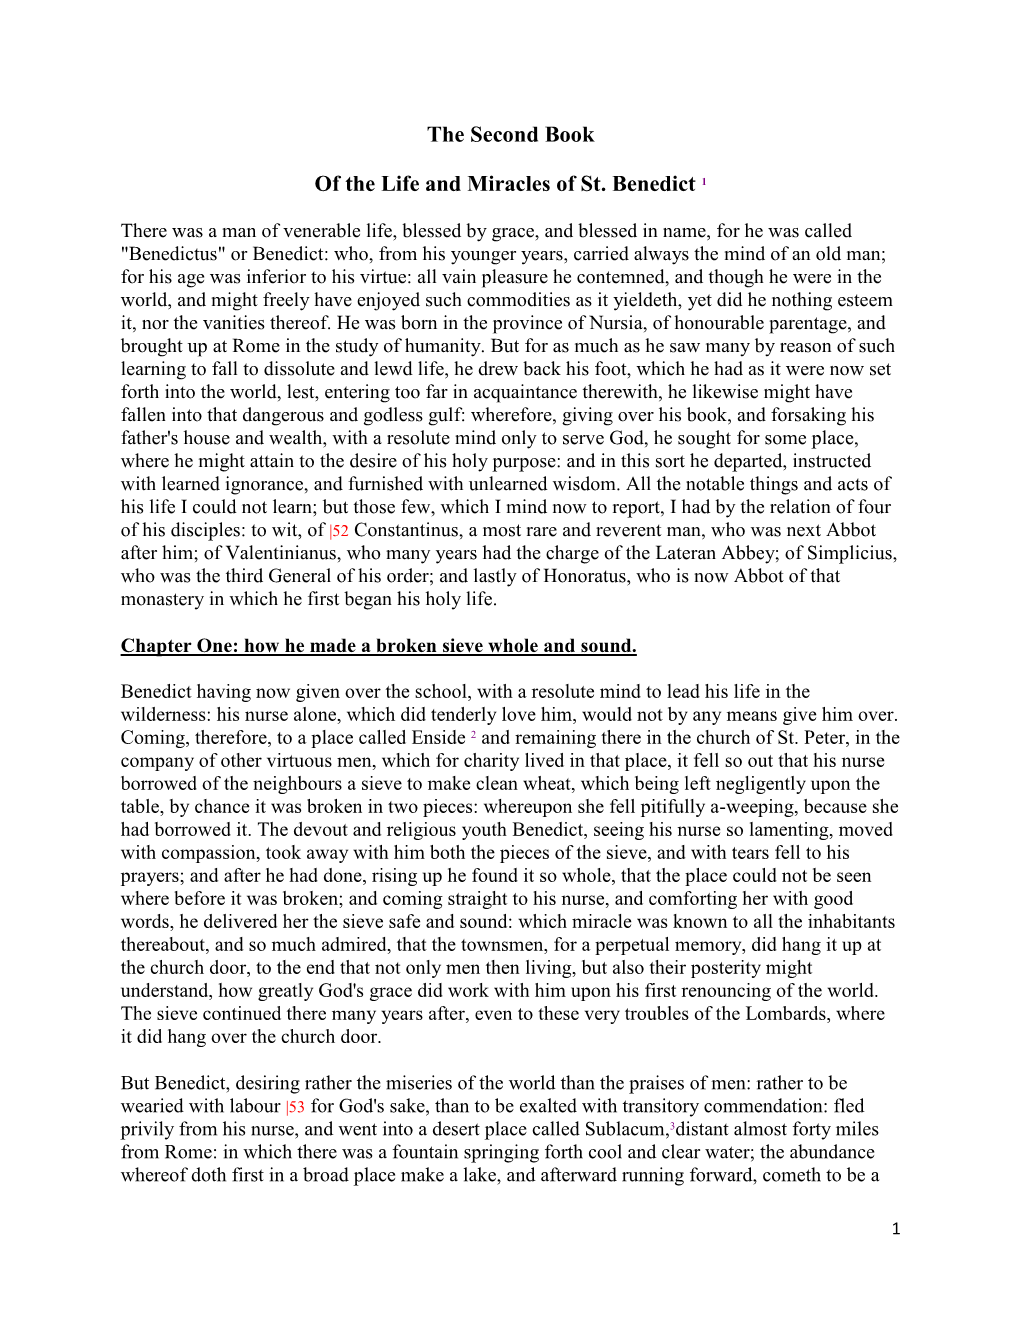 The Second Book of the Life and Miracles of St. Benedict 1